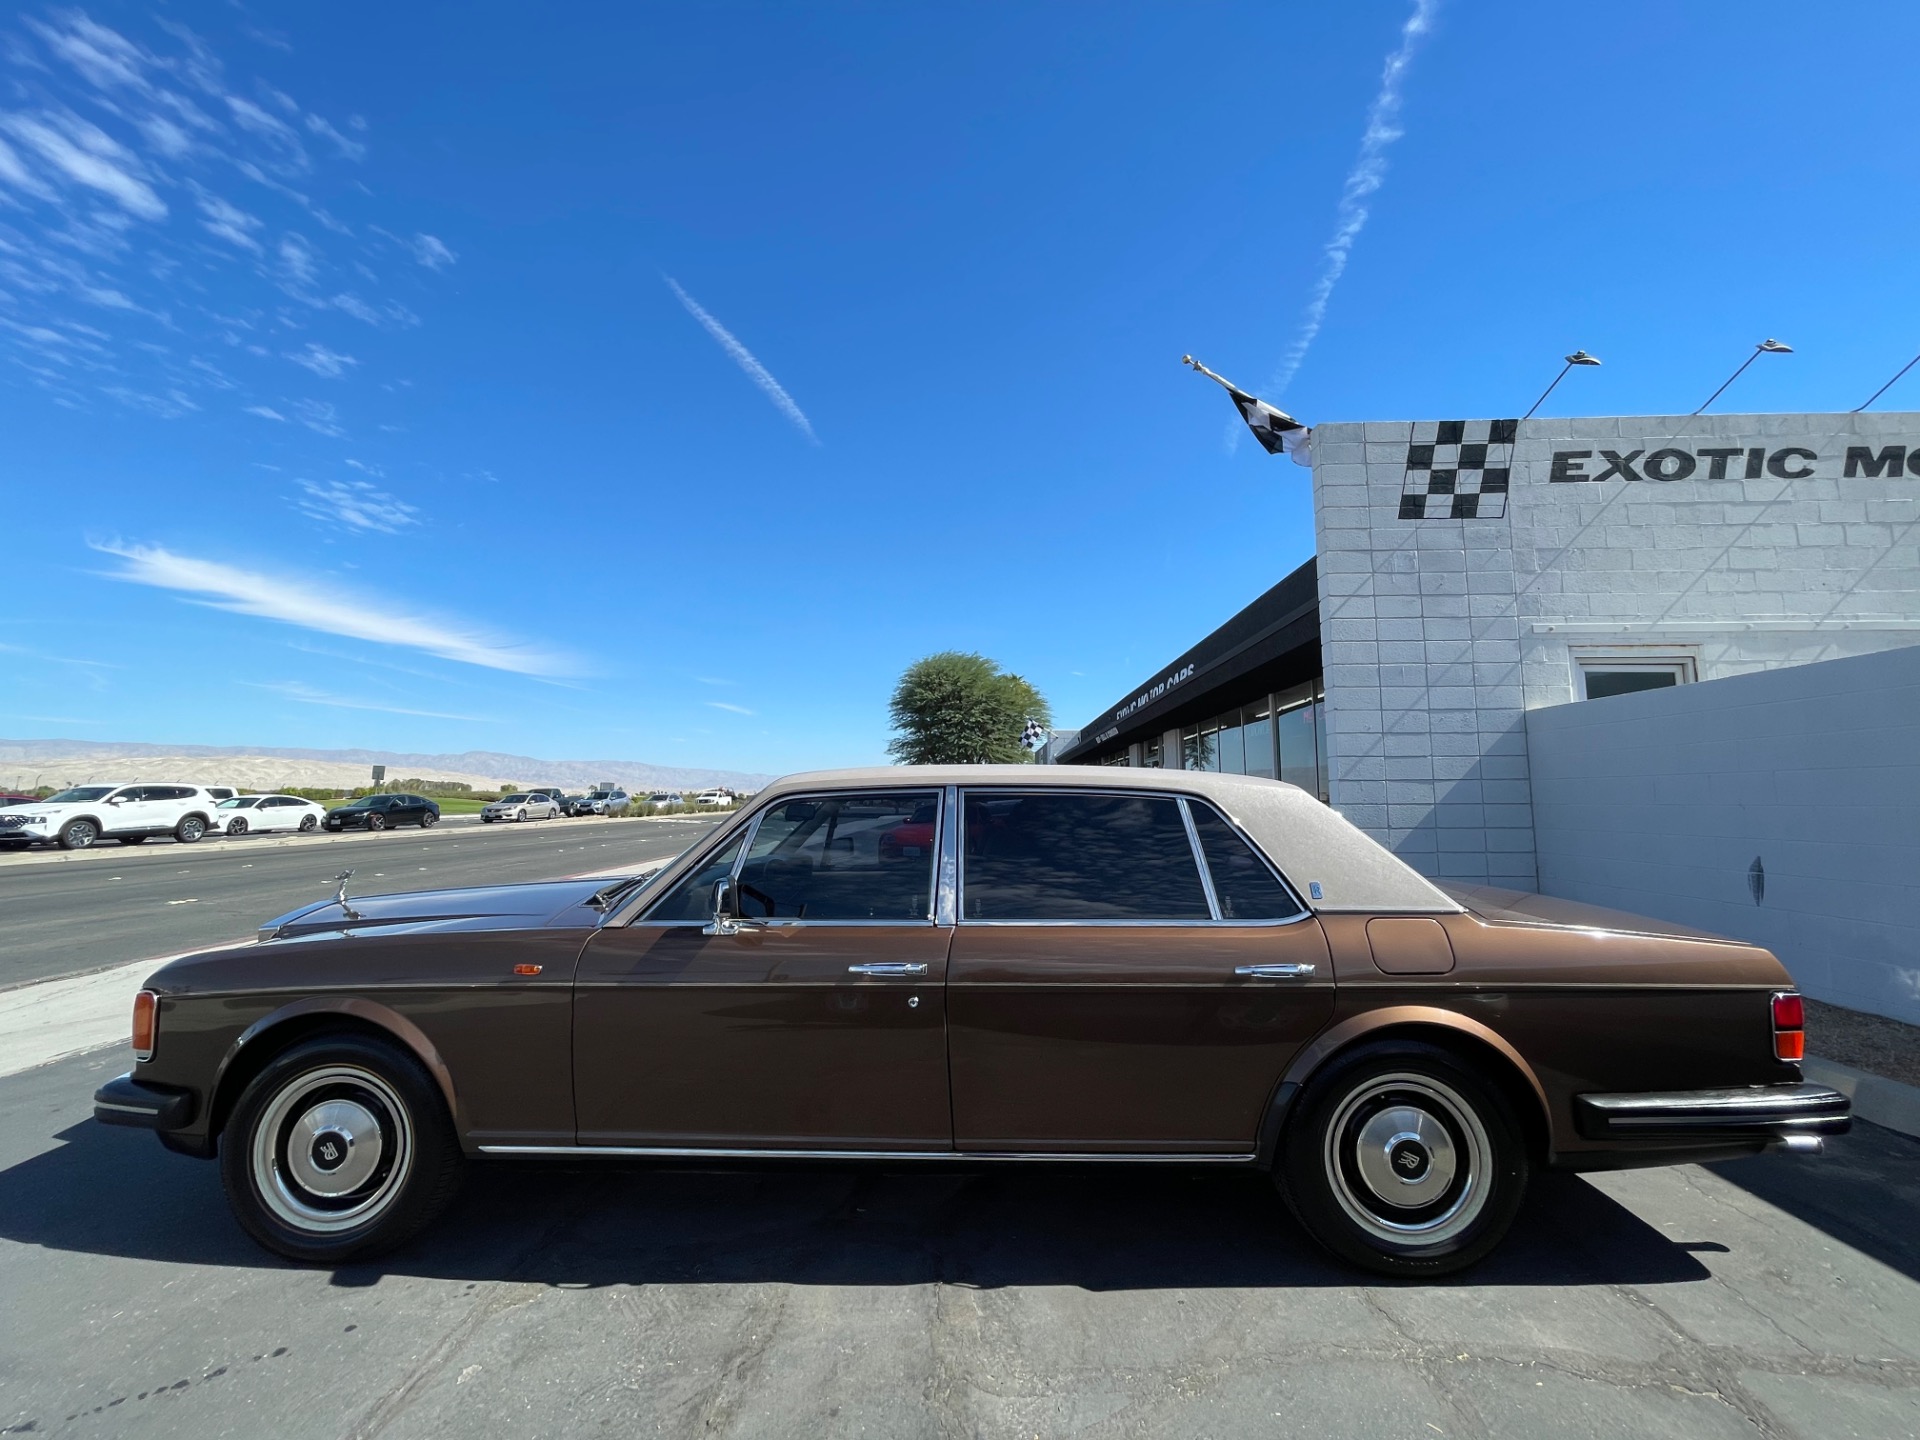 1984 Rolls Royce Silver Spur Stock # R467 for sale near Palm Springs, CA